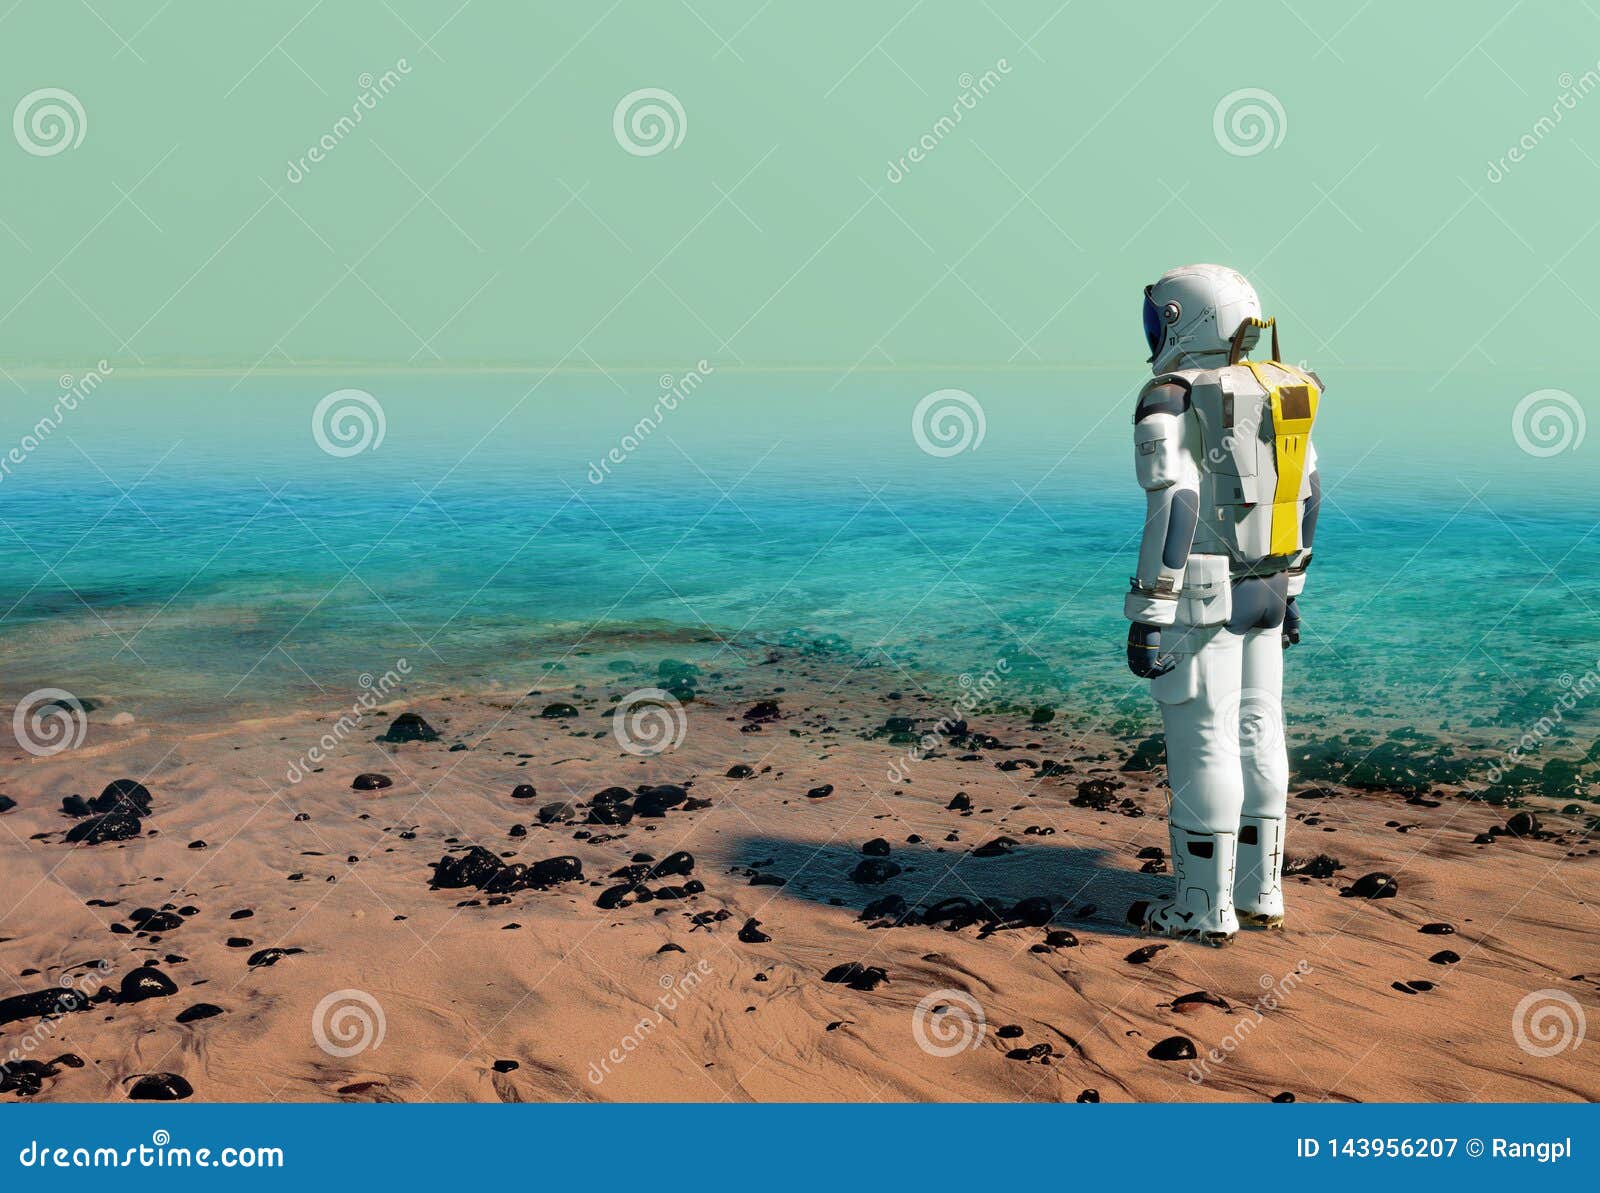 wearing a space suit